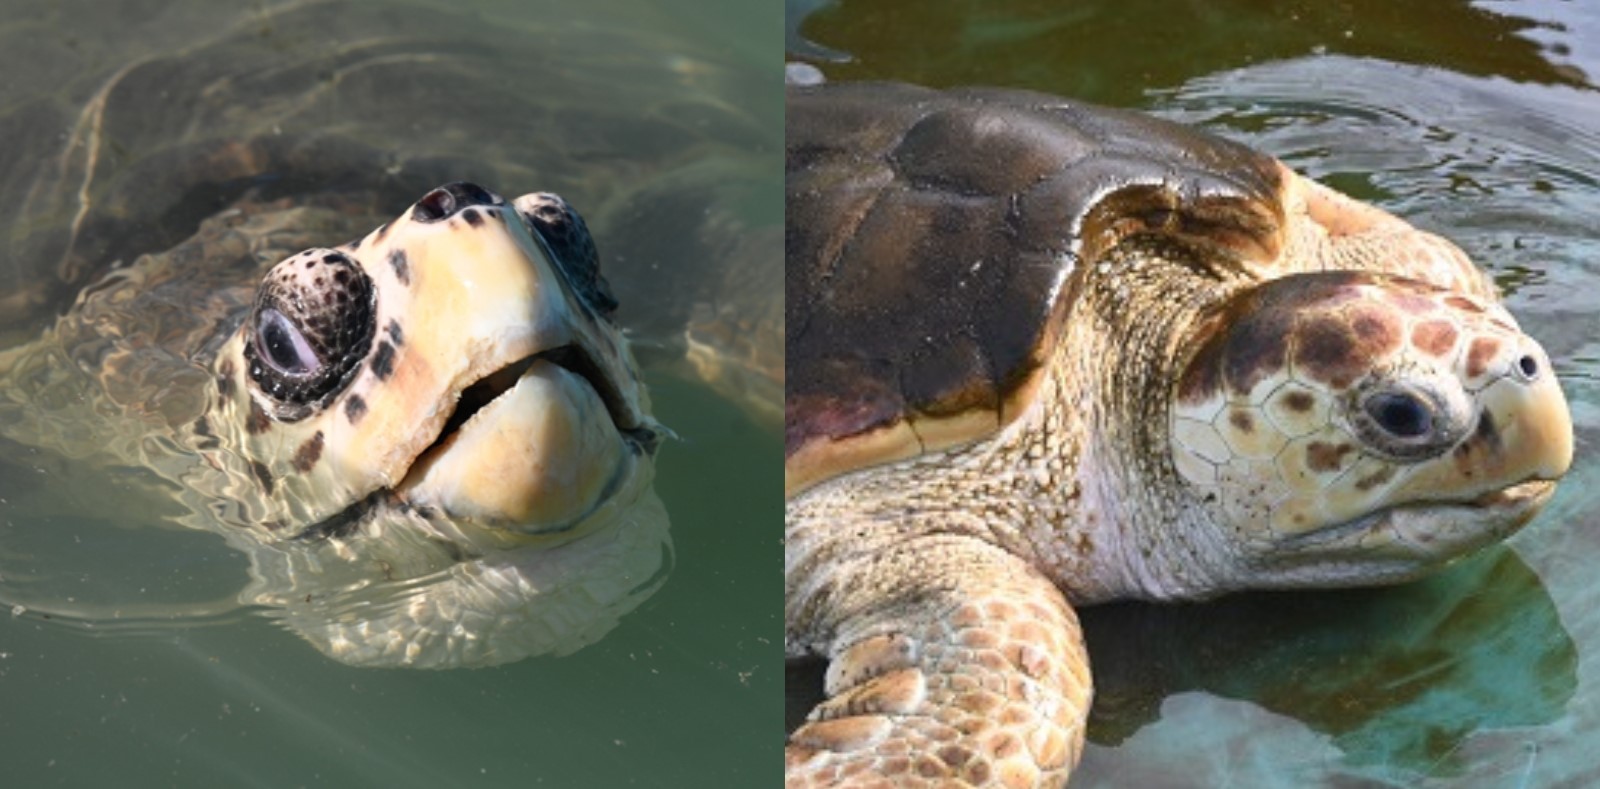 Two photos side by side of two different turtles, Genoveffa and Gavino